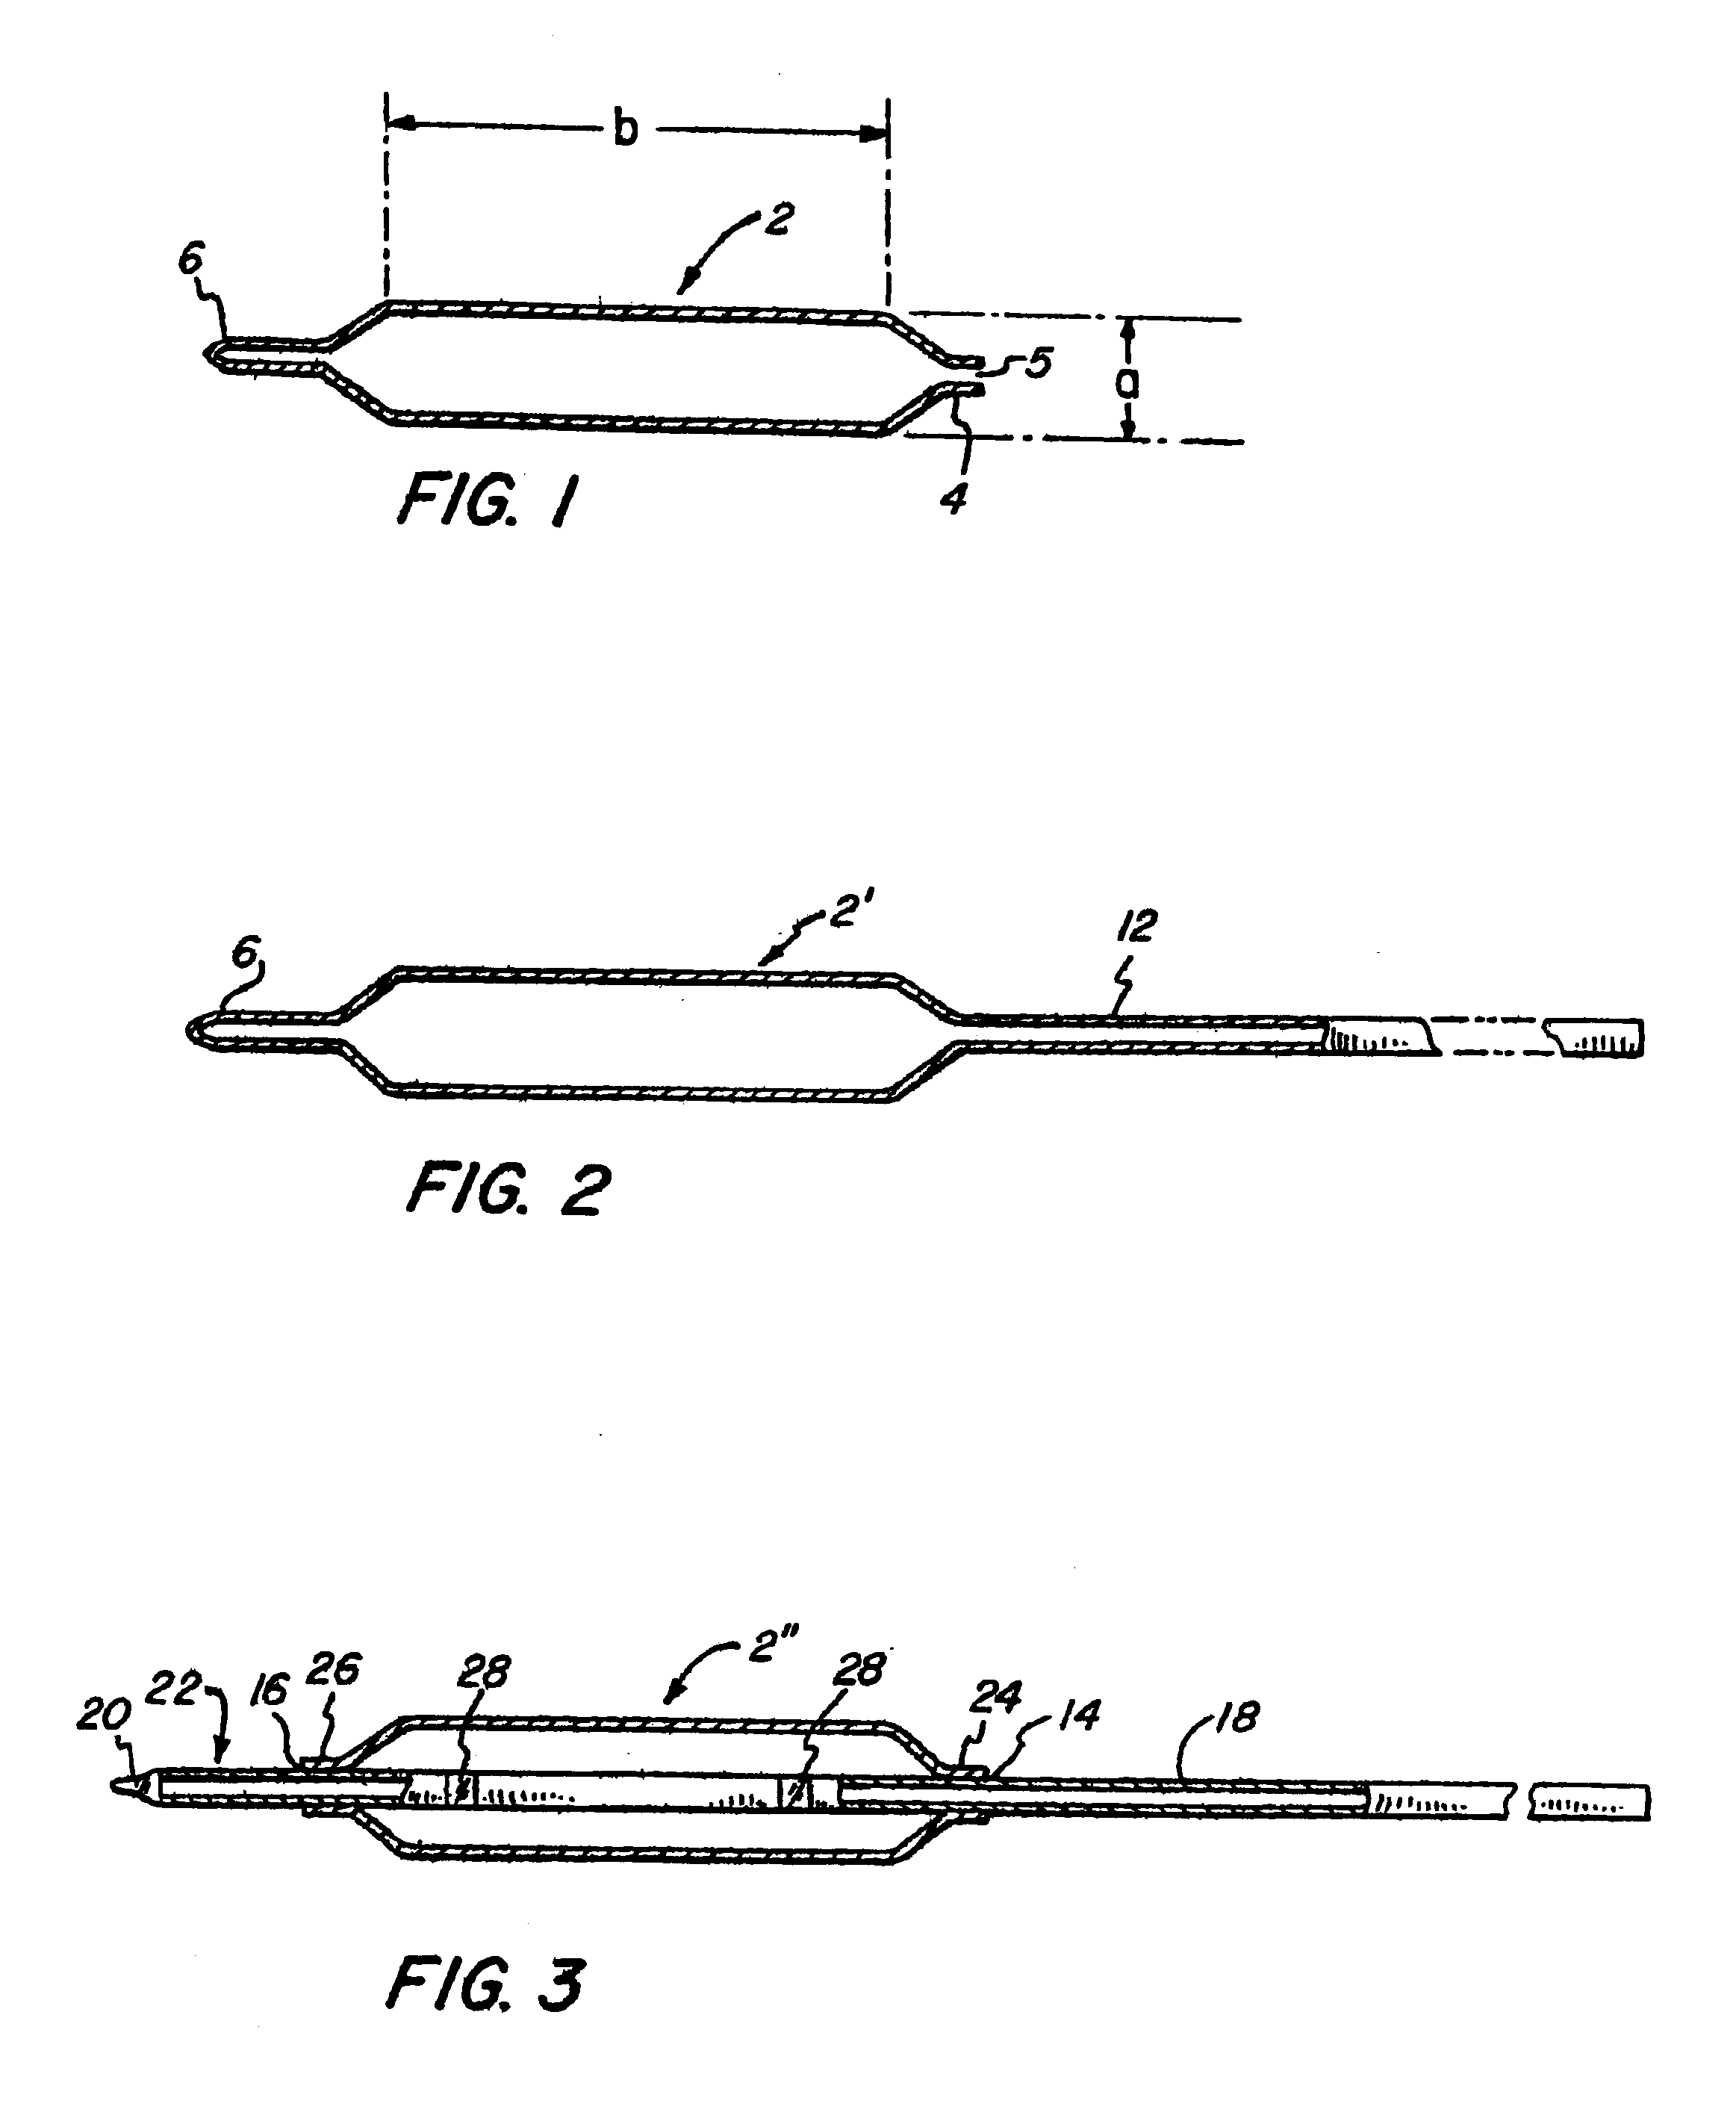 Isotropically expansible balloon articles useful in in vivo lumenal procedures, and method of making such balloon articles